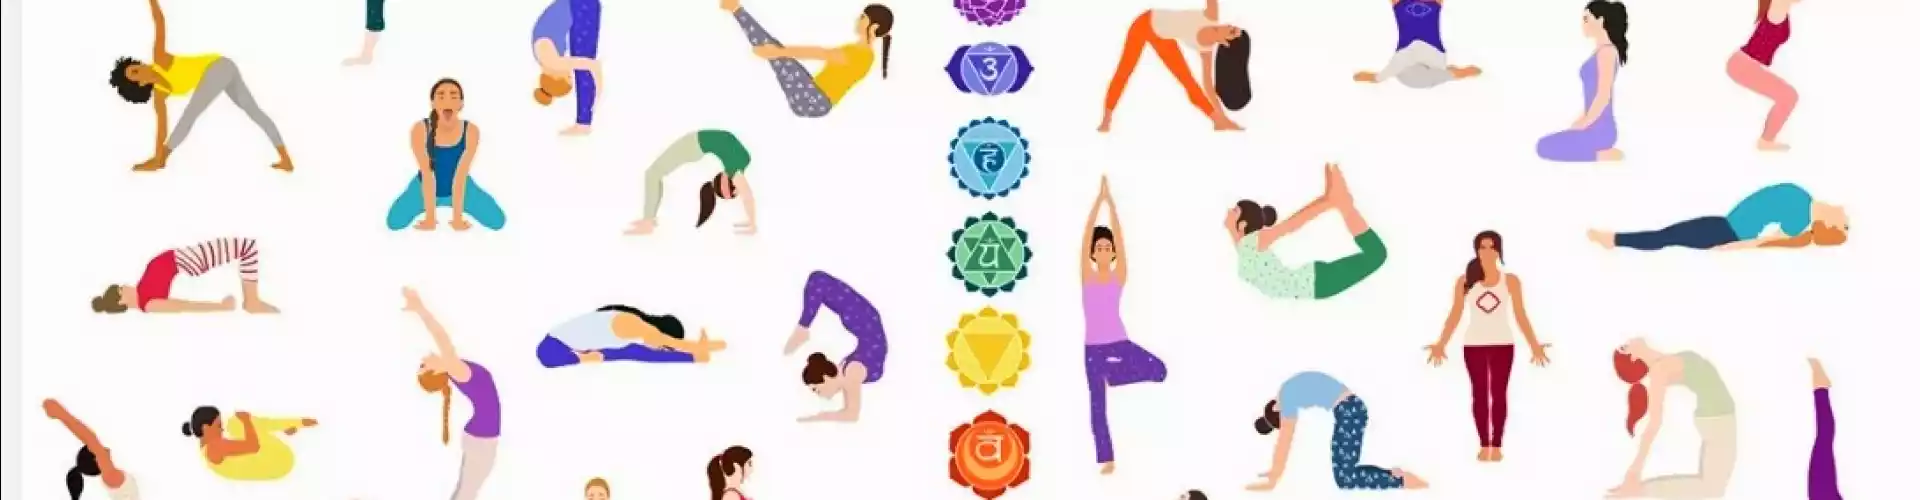 Powerful Root Chakra Yoga Poses For Grounding Your Energy